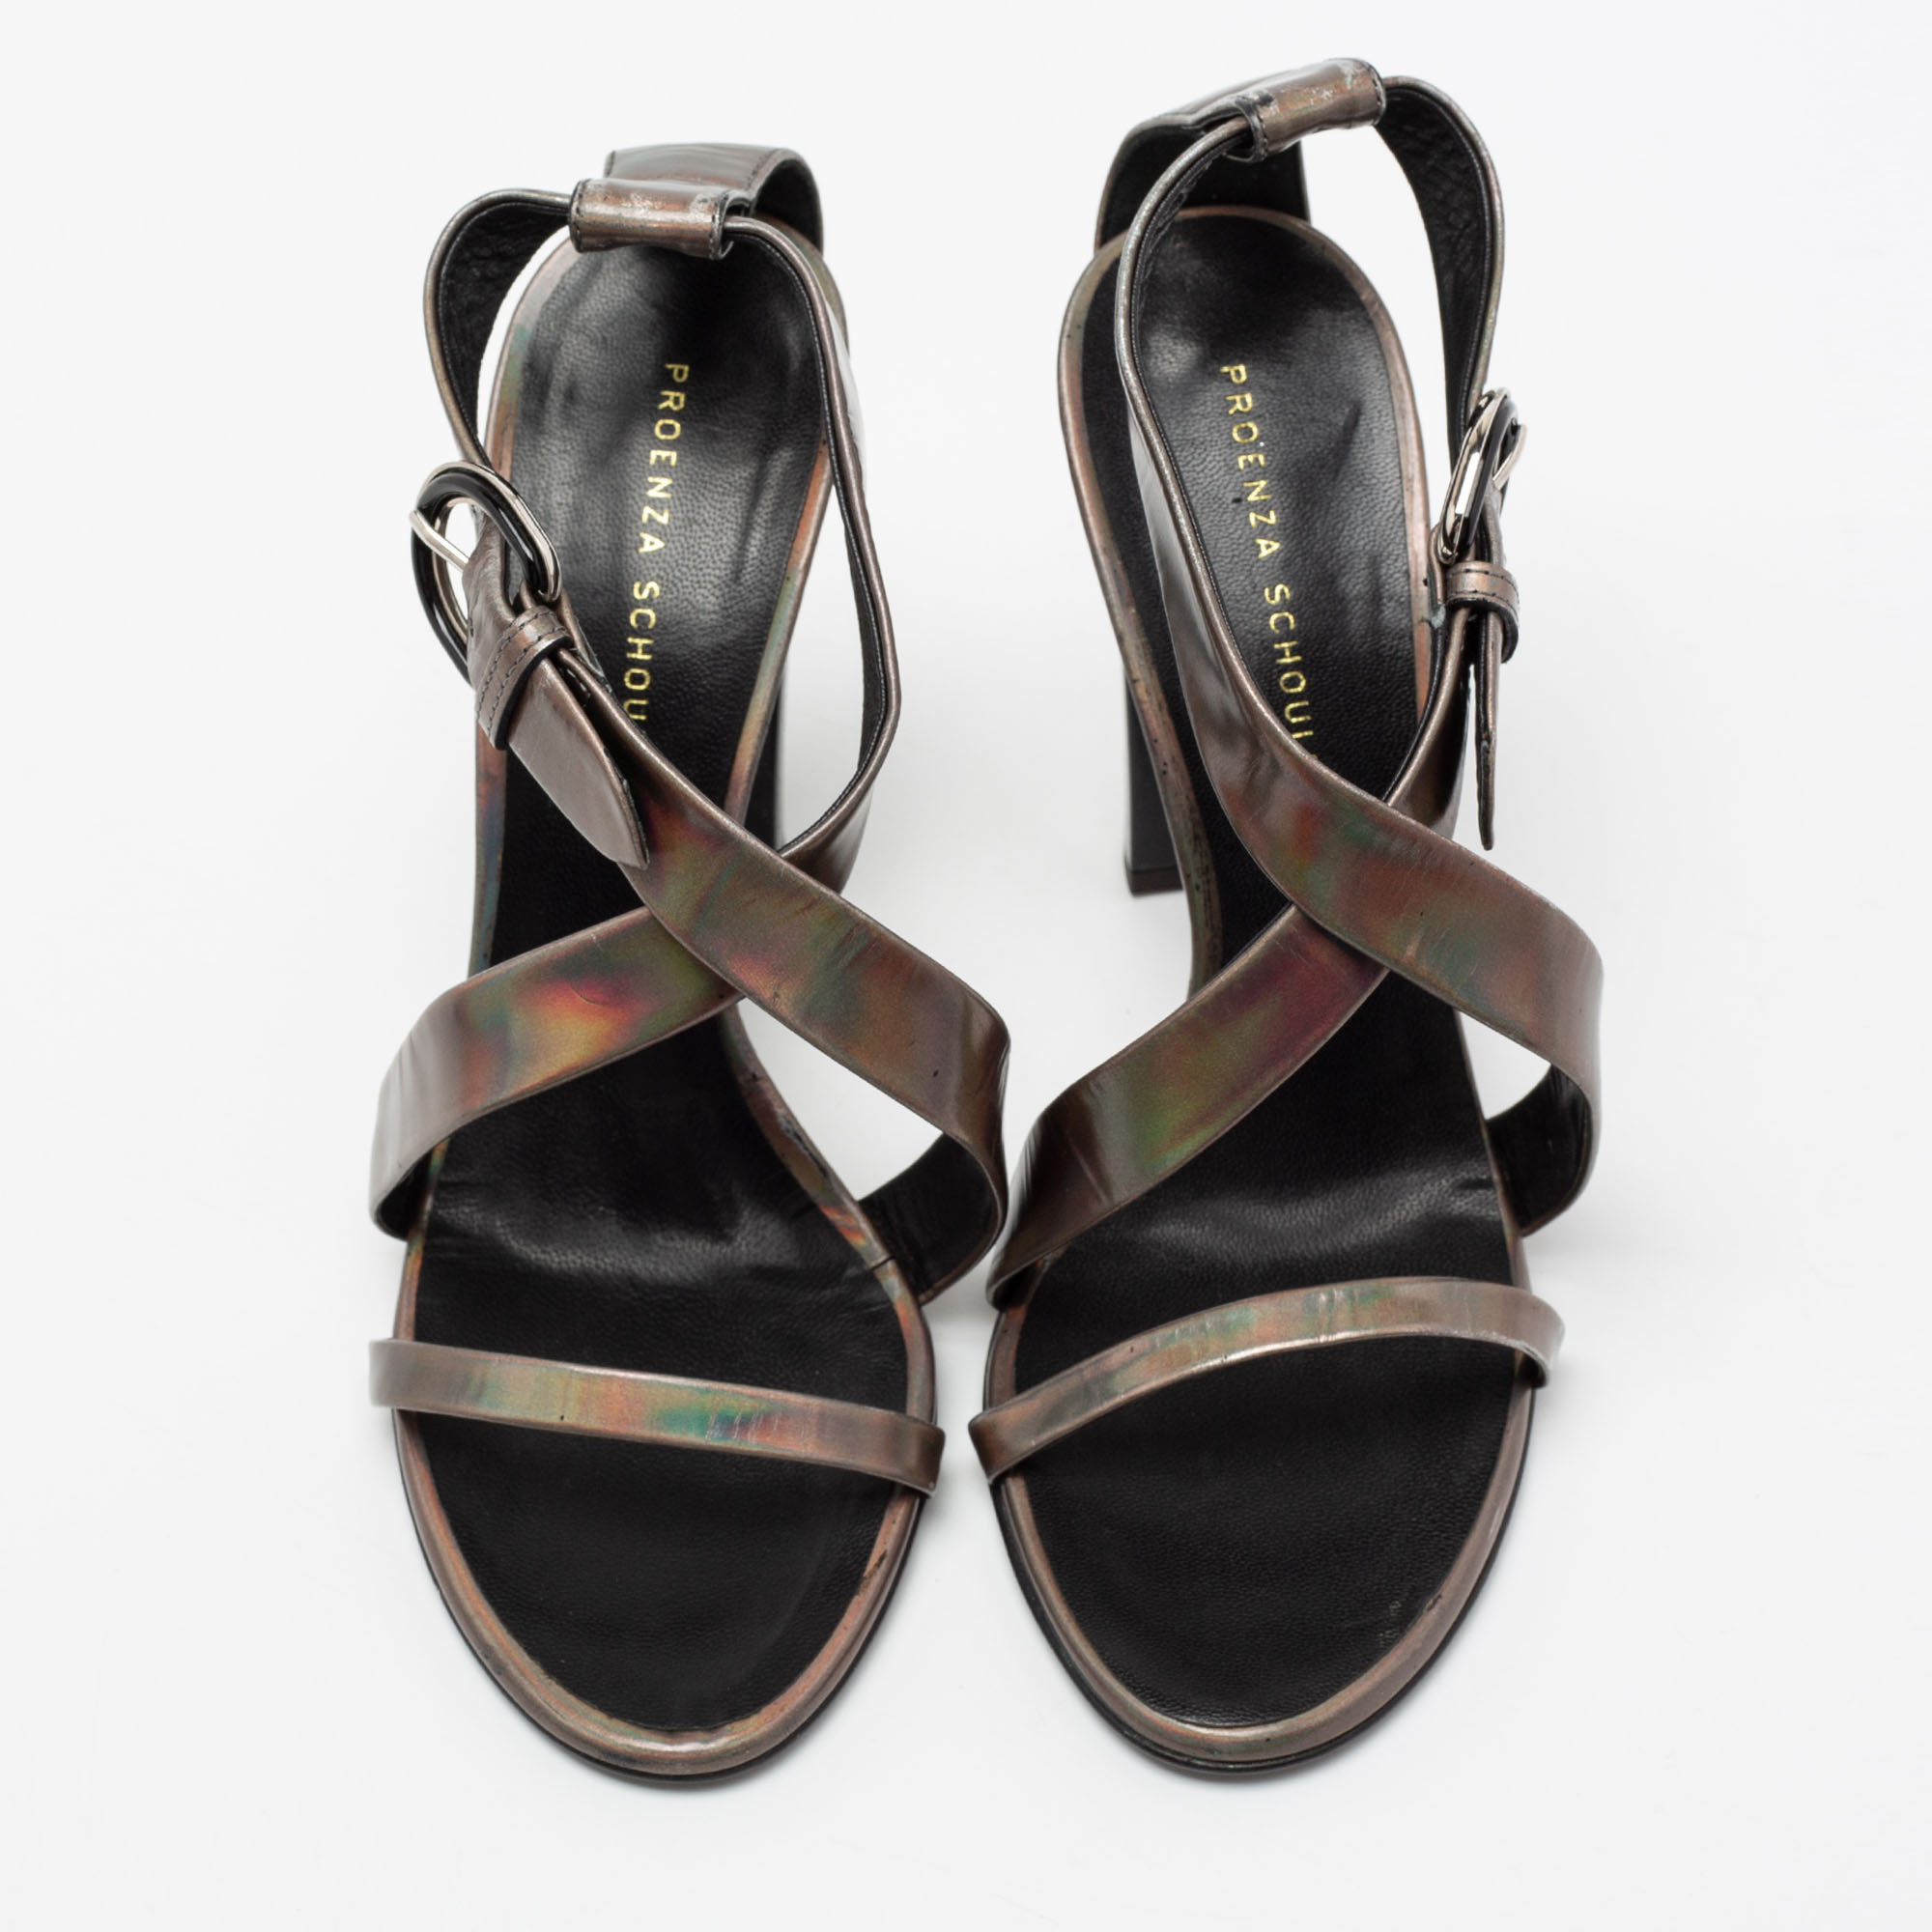 Proenza Schouler Metallic Patent Leather Iridescent Strappy Sandals Size 37.5